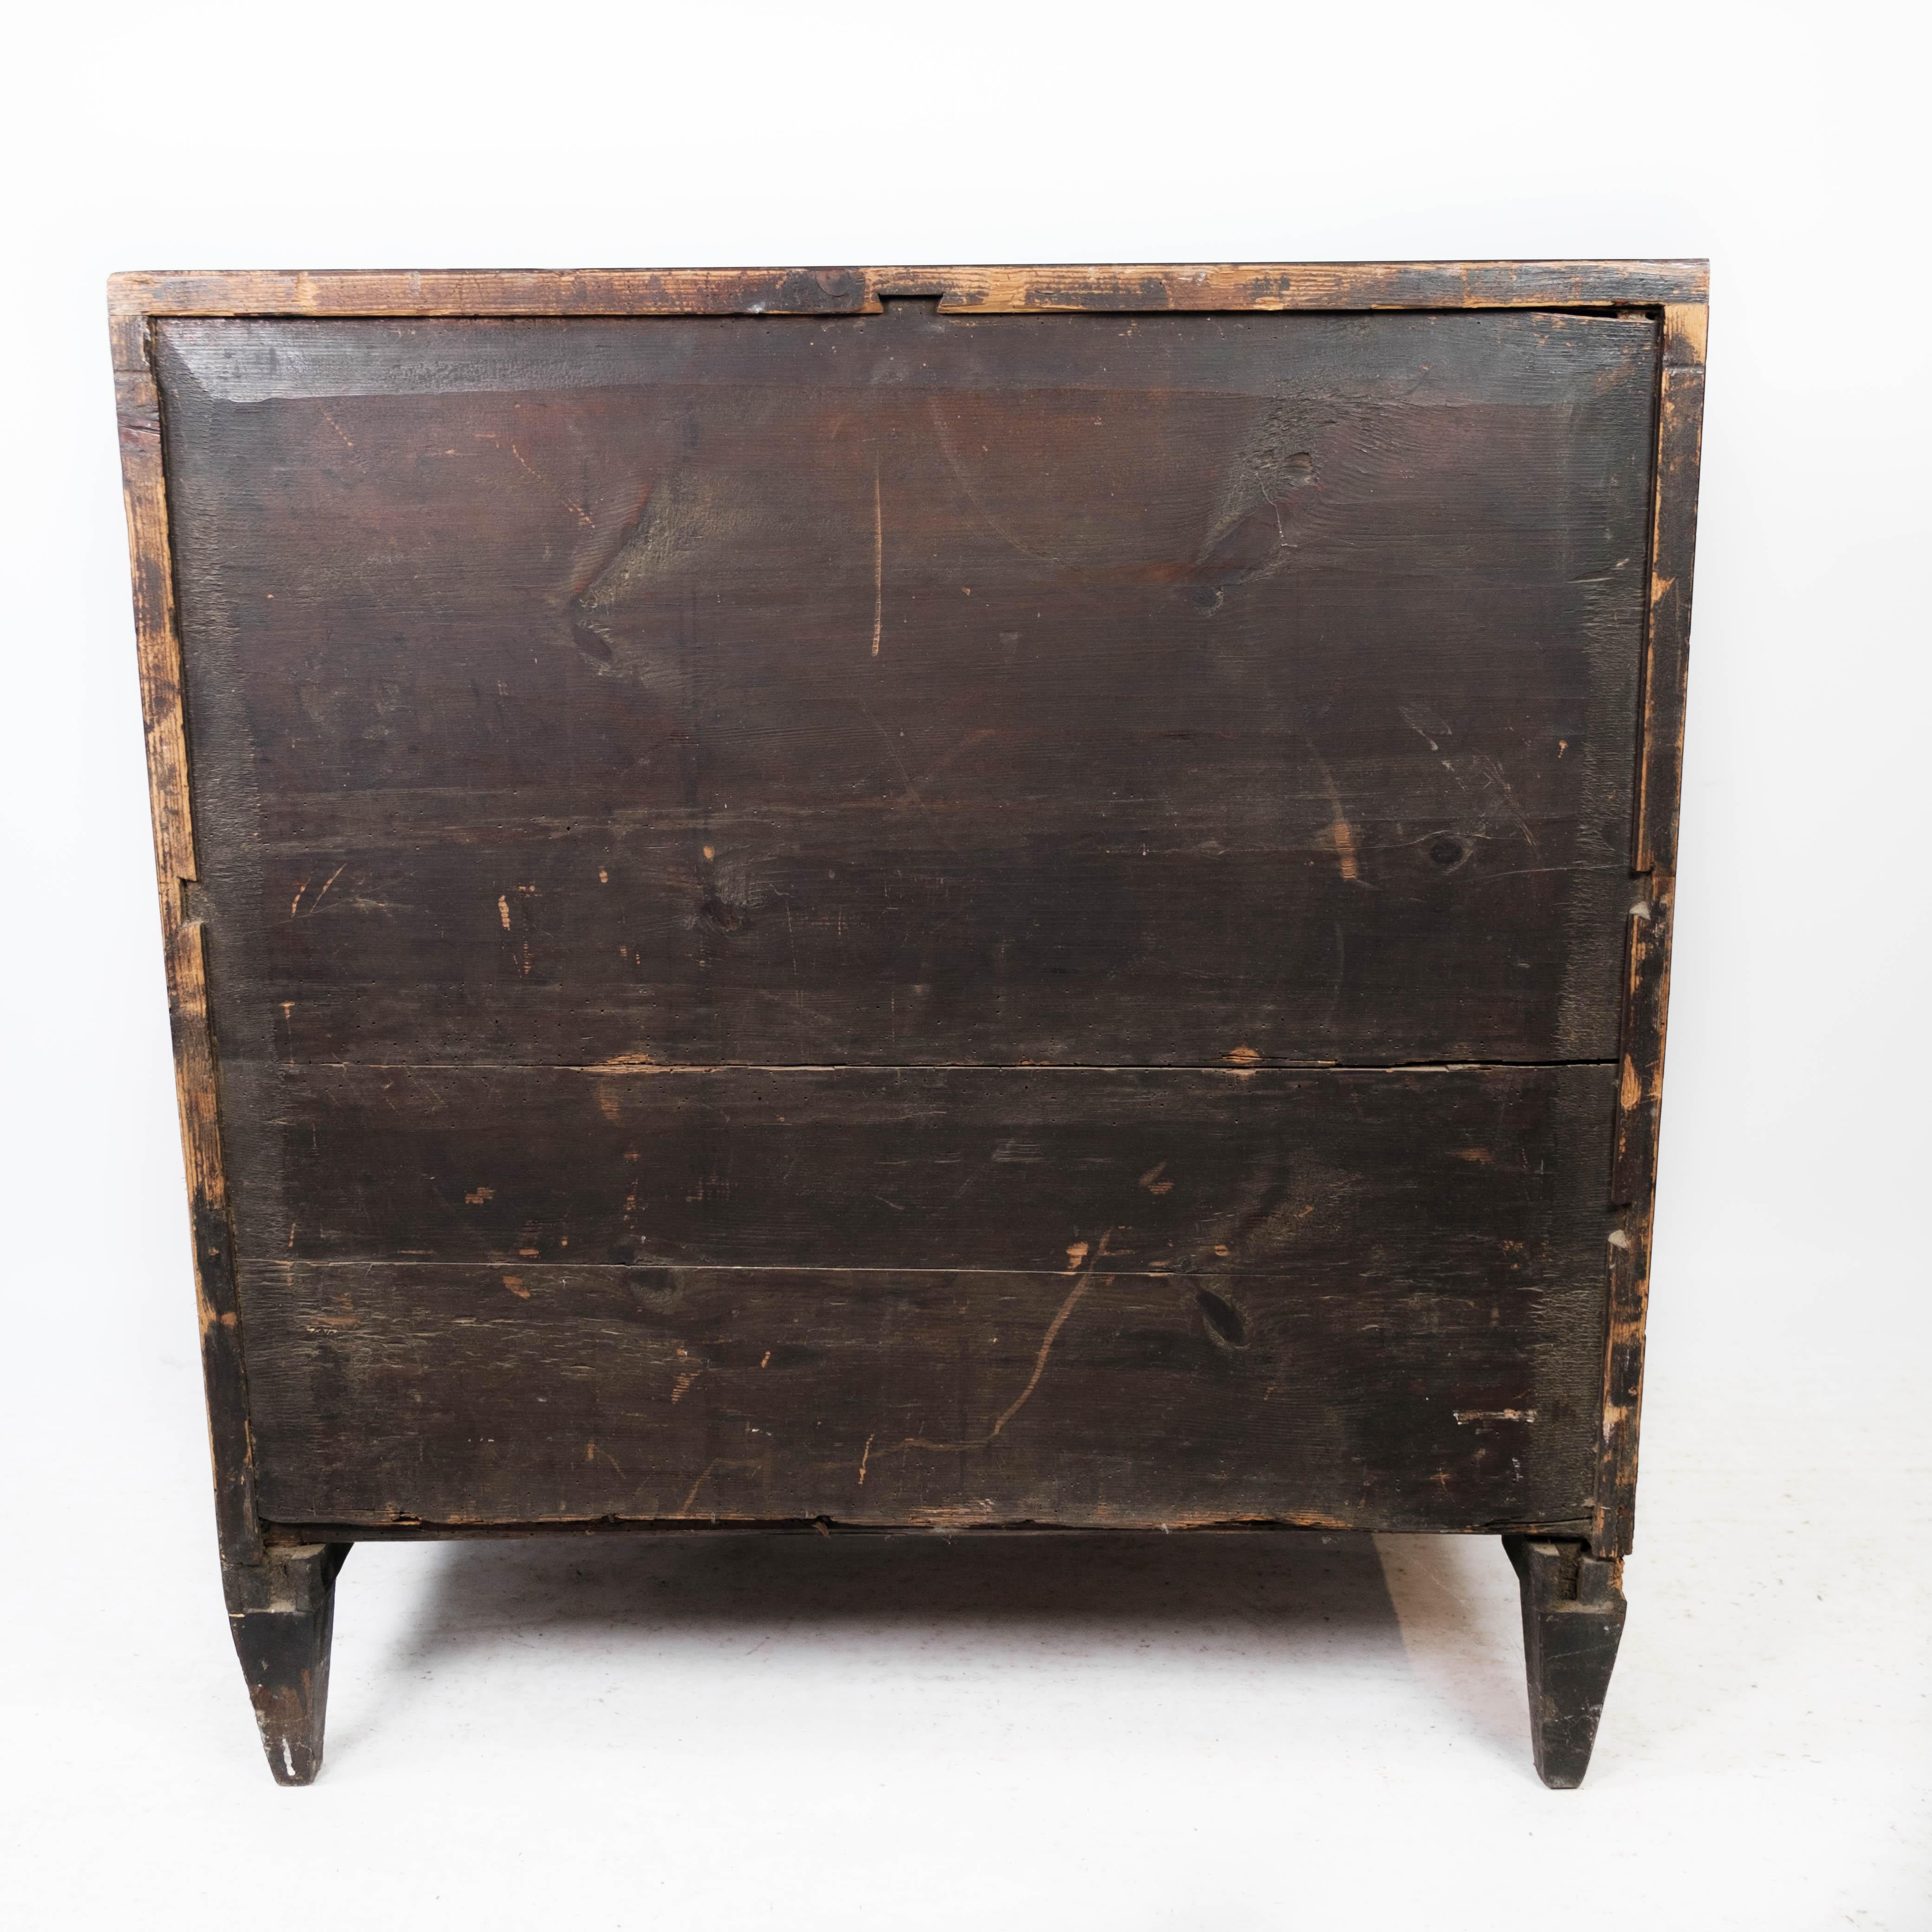 Louis Seize Chest of Drawers Made In Mahogany With Inlaid Wood From 1790s For Sale 7